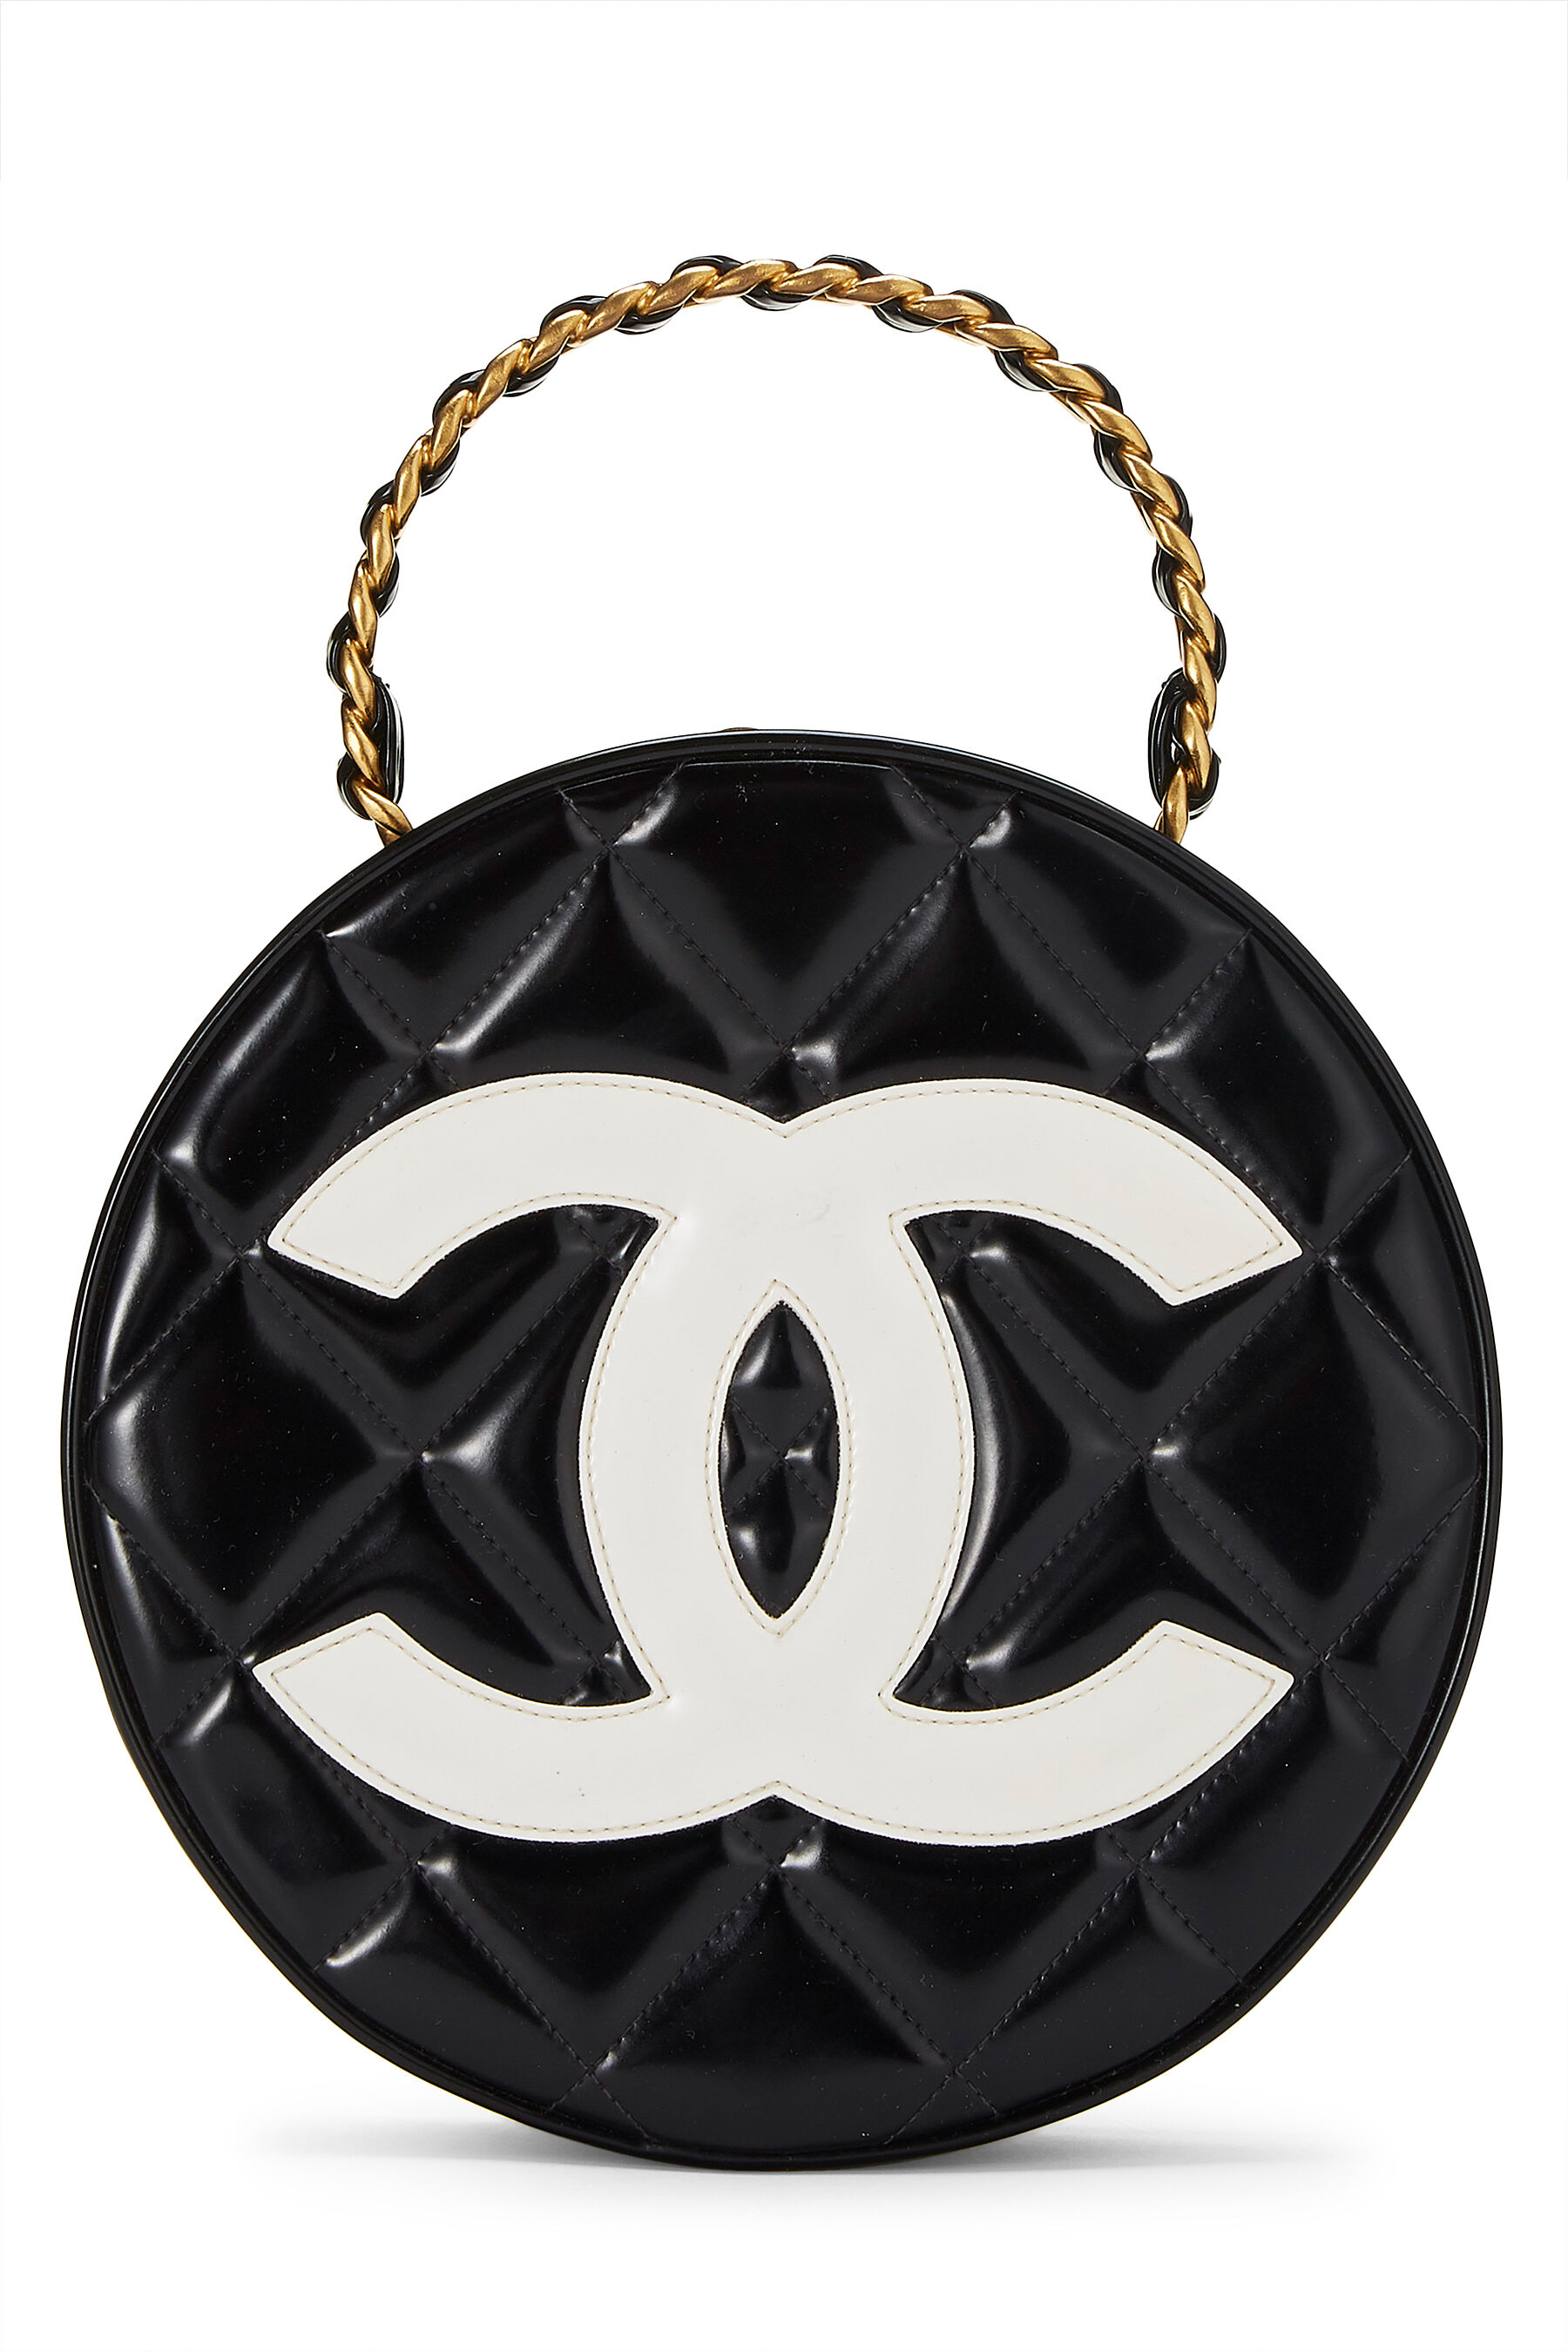 Chanel - Black Quilted Patent Leather 'CC' Round Bag